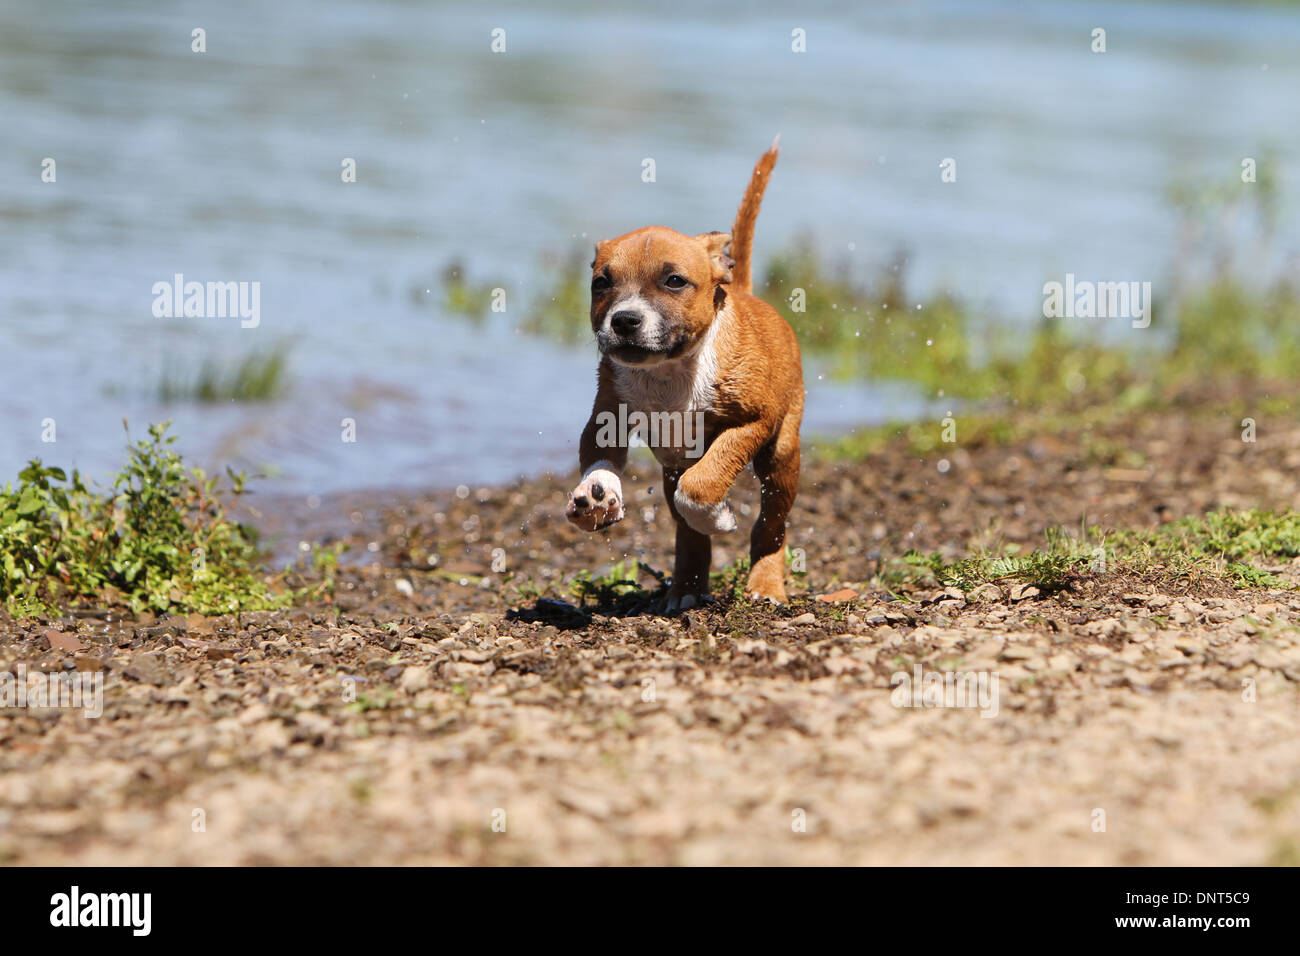 dog Staffordshire Bull Terrier / Staffie  puppy running at the edge of a lake Stock Photo